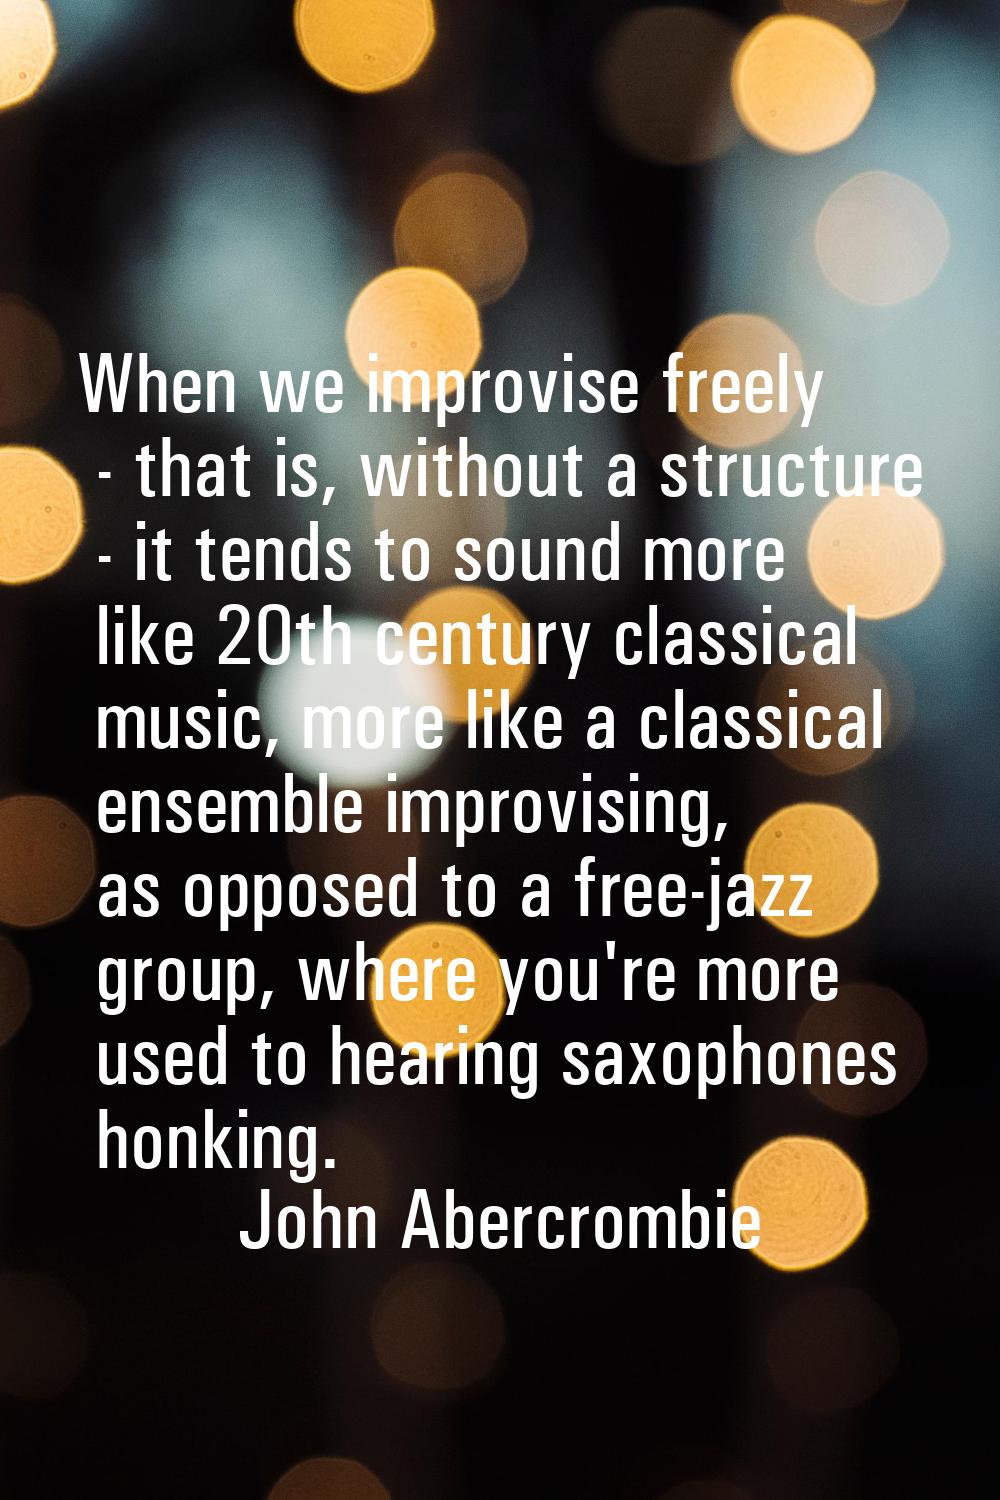 When we improvise freely - that is, without a structure - it tends to sound more like 20th century 